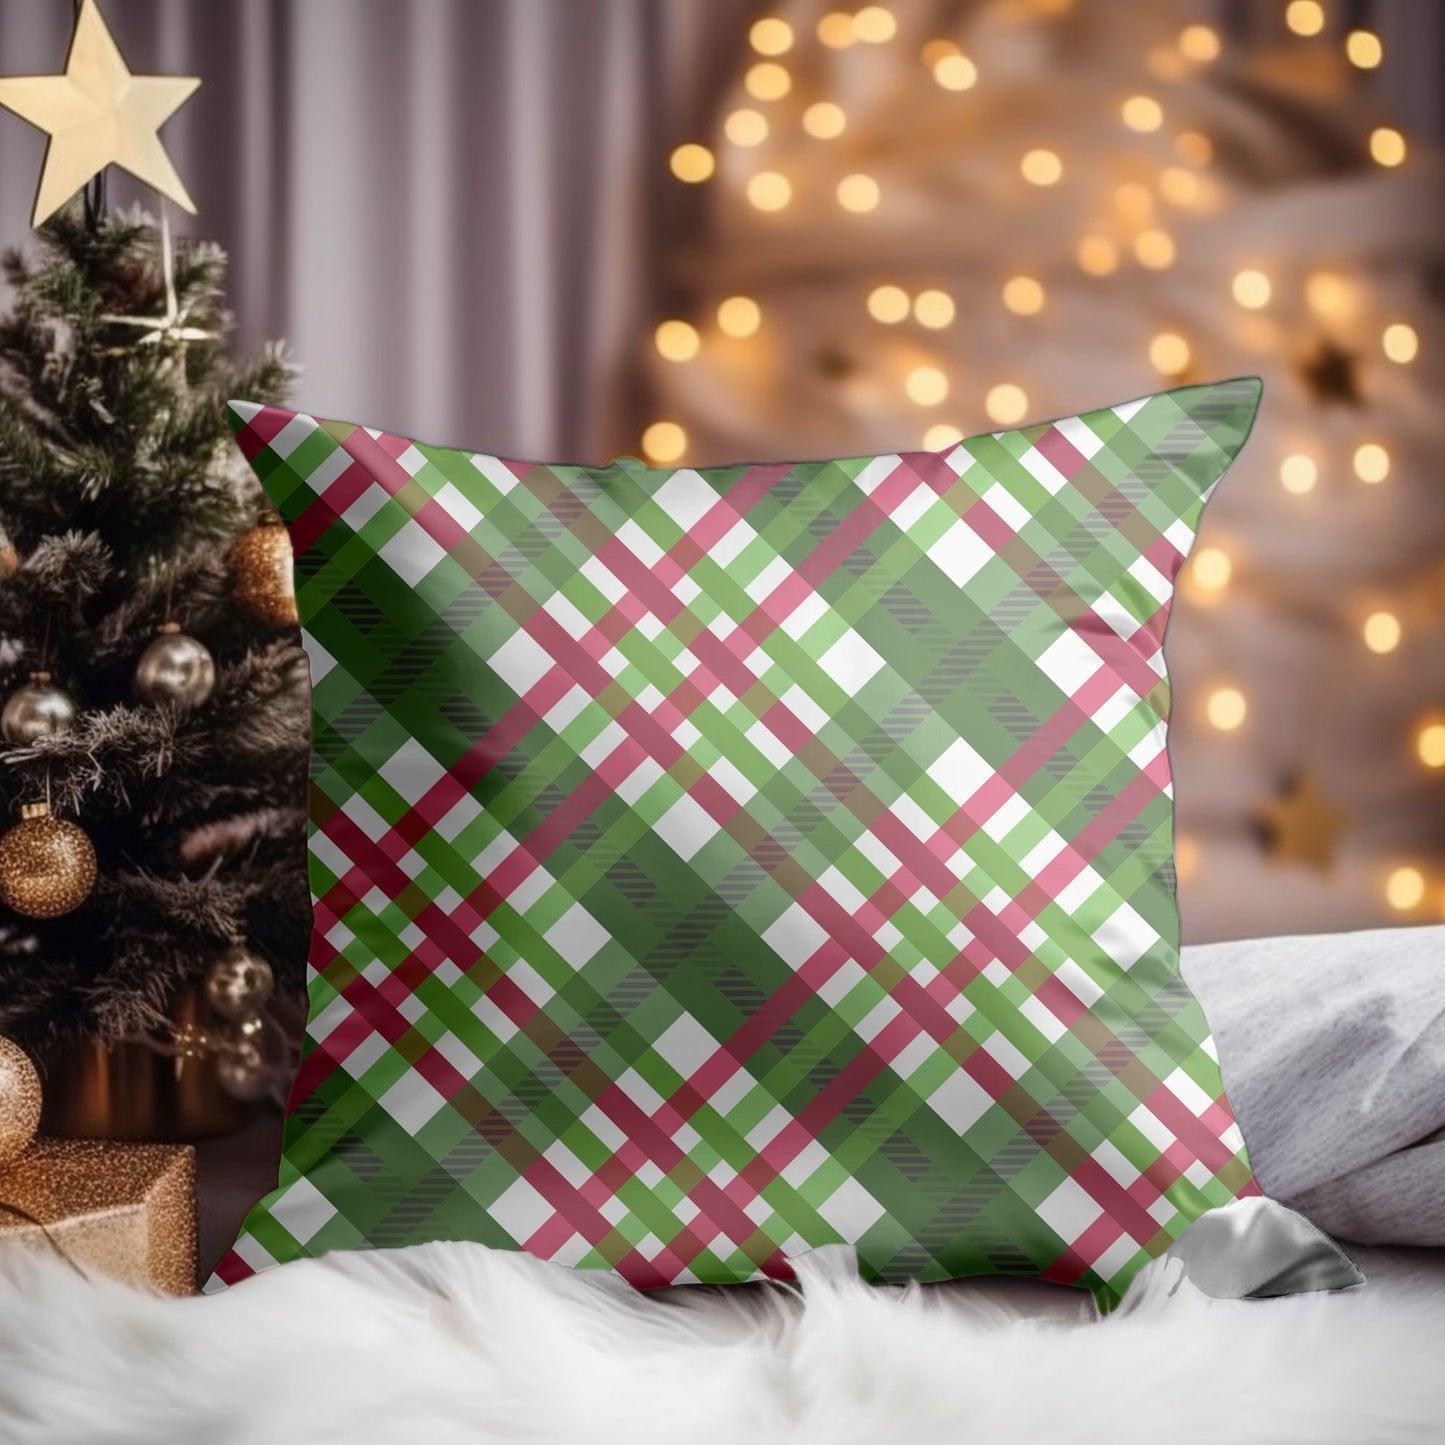 Detailed Close-up of Festive Green Plaid Throw Pillow